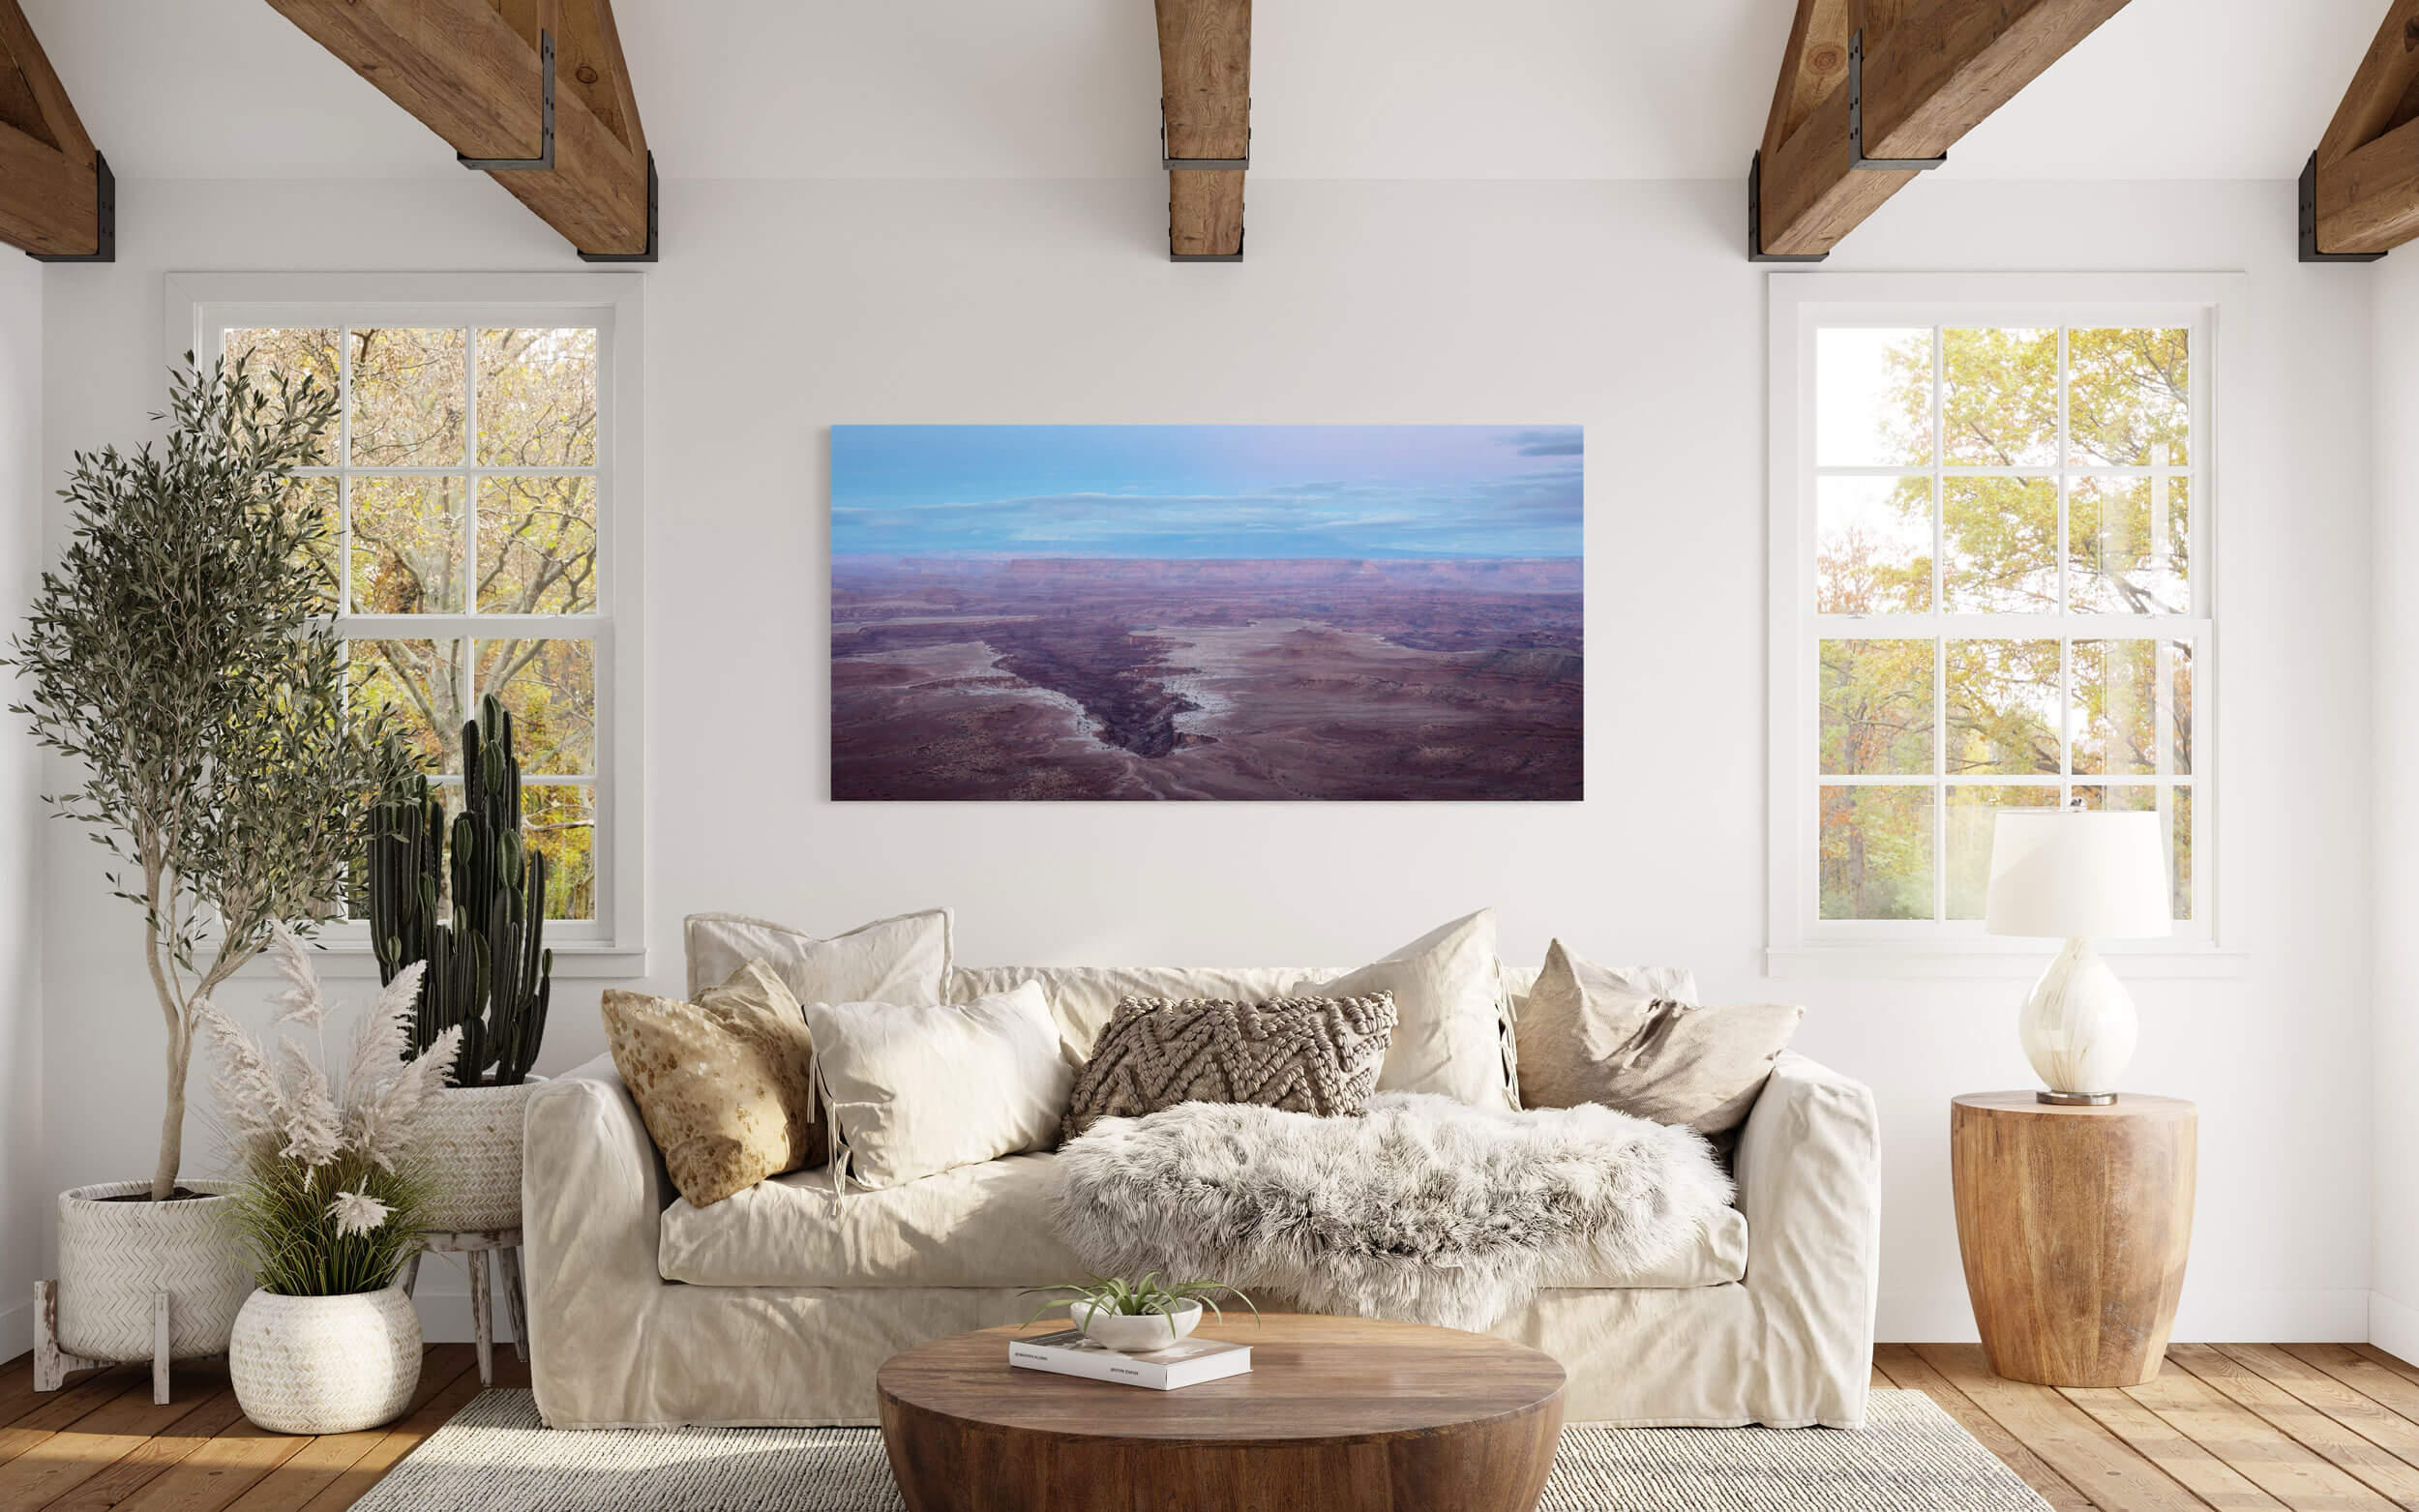 A piece of Moab art showing a Canyonlands National Park picture at sunset hangs in a living room.